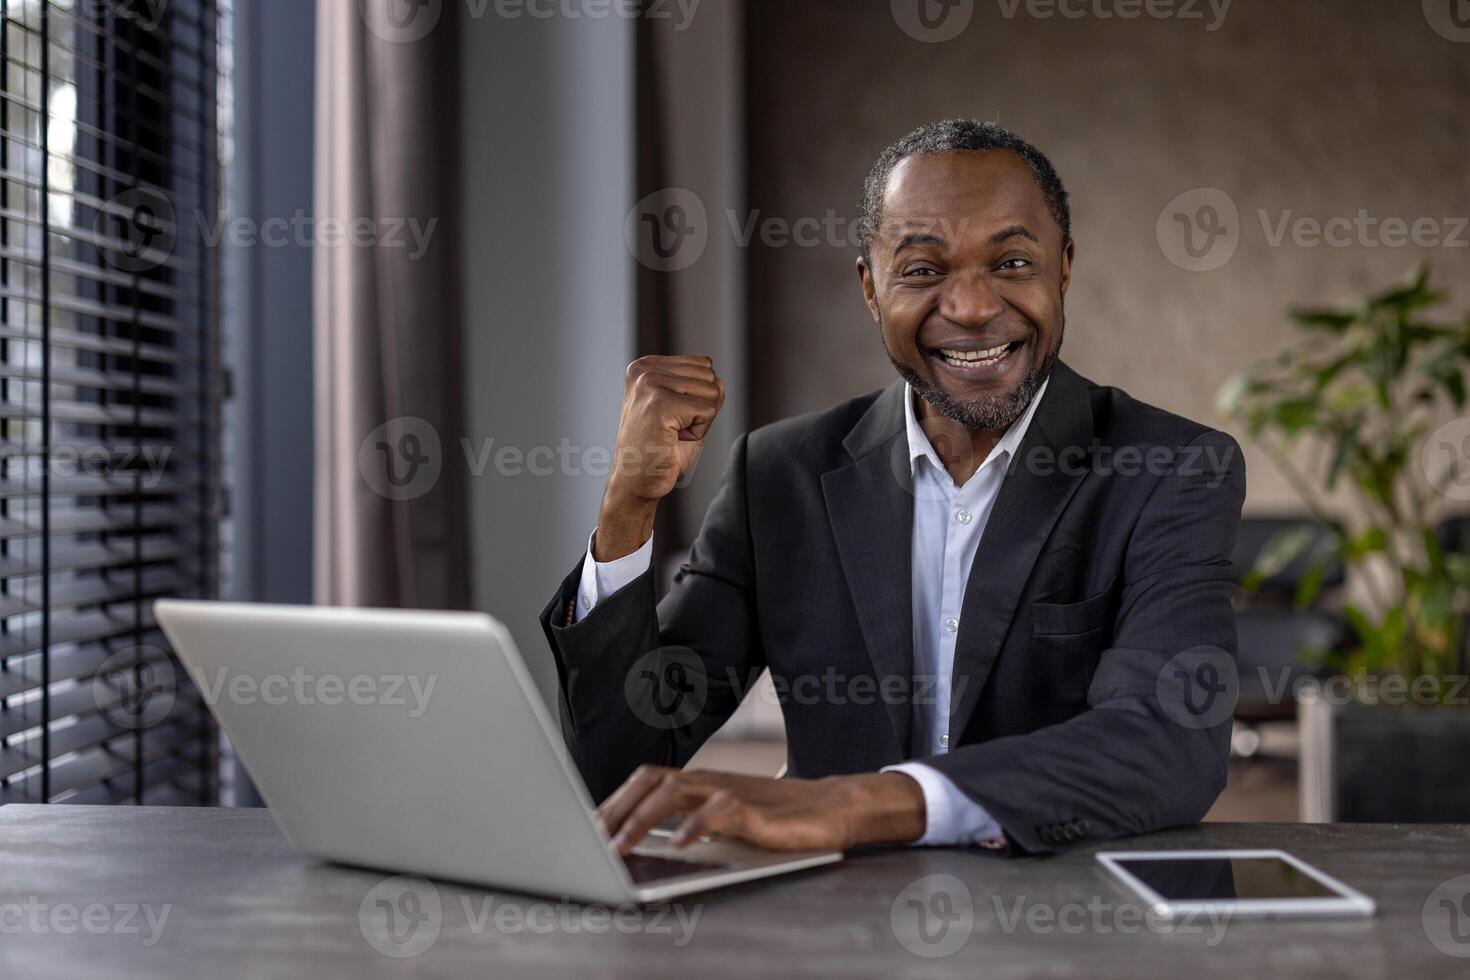 Portrait of mature experienced man businessman winner, senior african american boss joyful looking at camera, holding hands up in triumph gesture, celebrating successful achievement results. photo